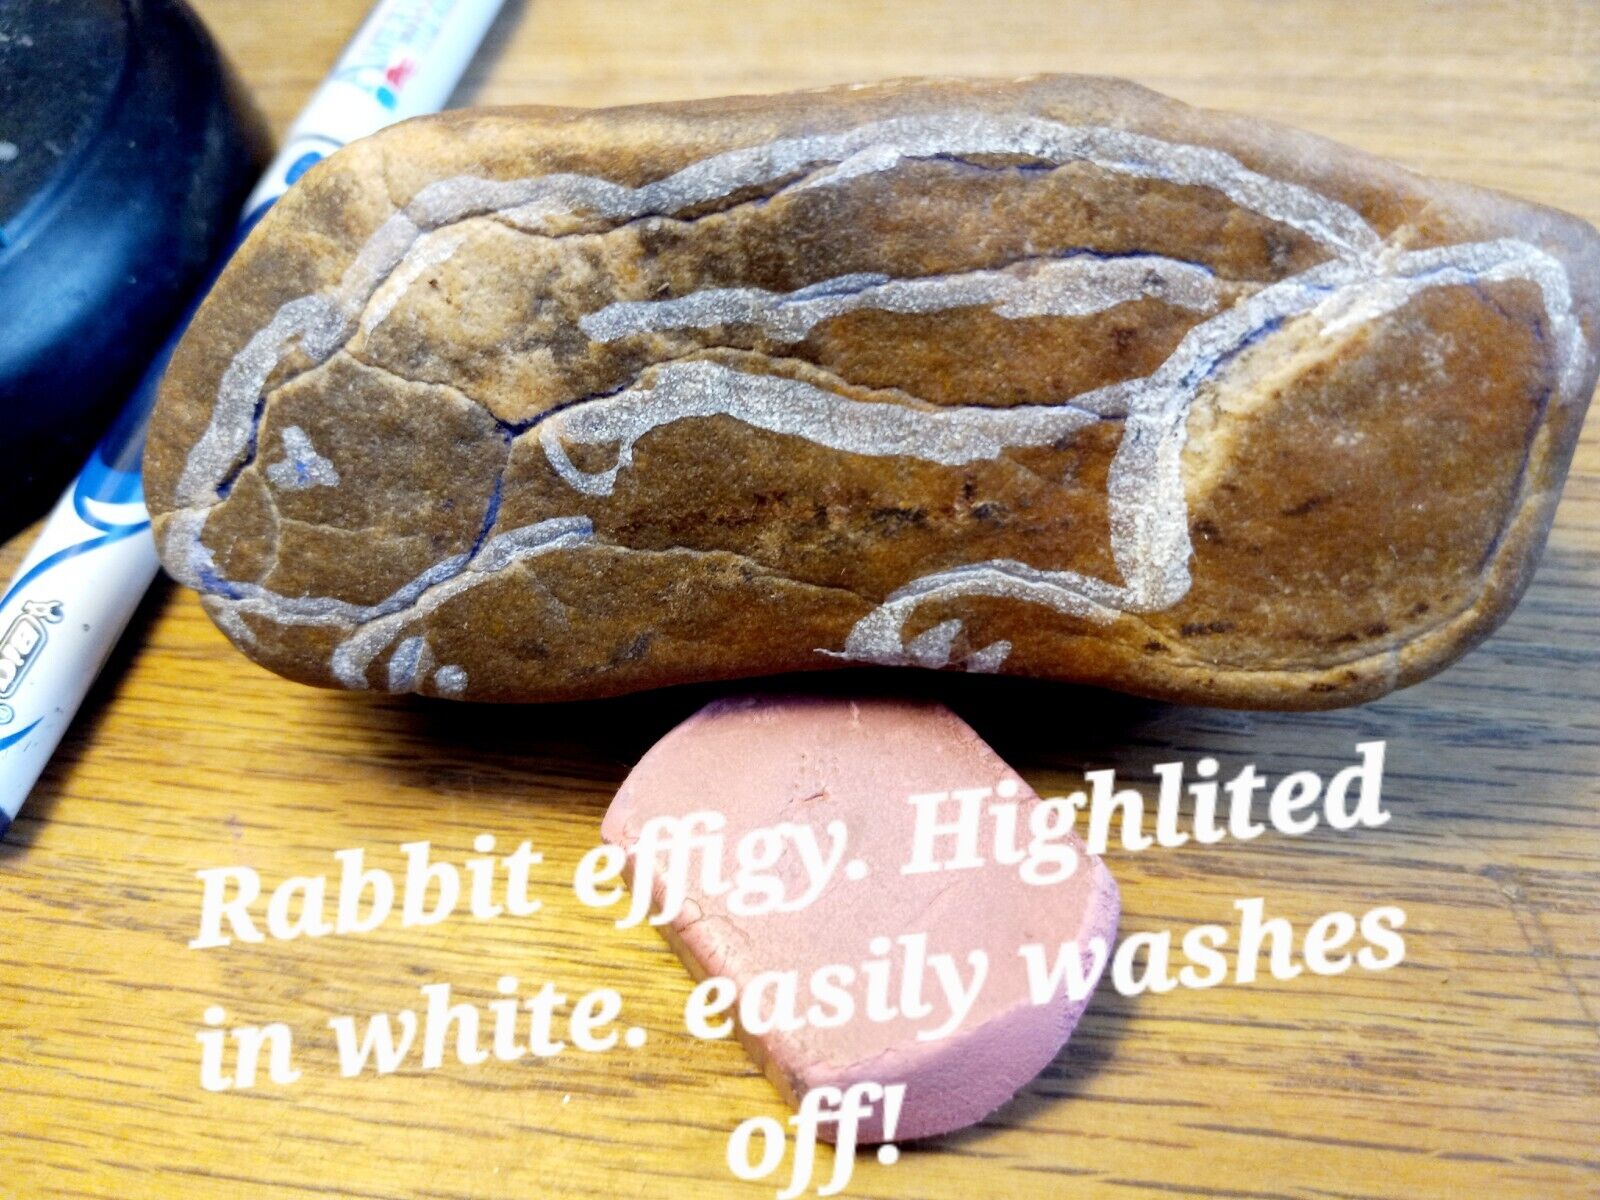 Rabit effigy Art Paleolithic old Collectable Native American Stone tool Artifact